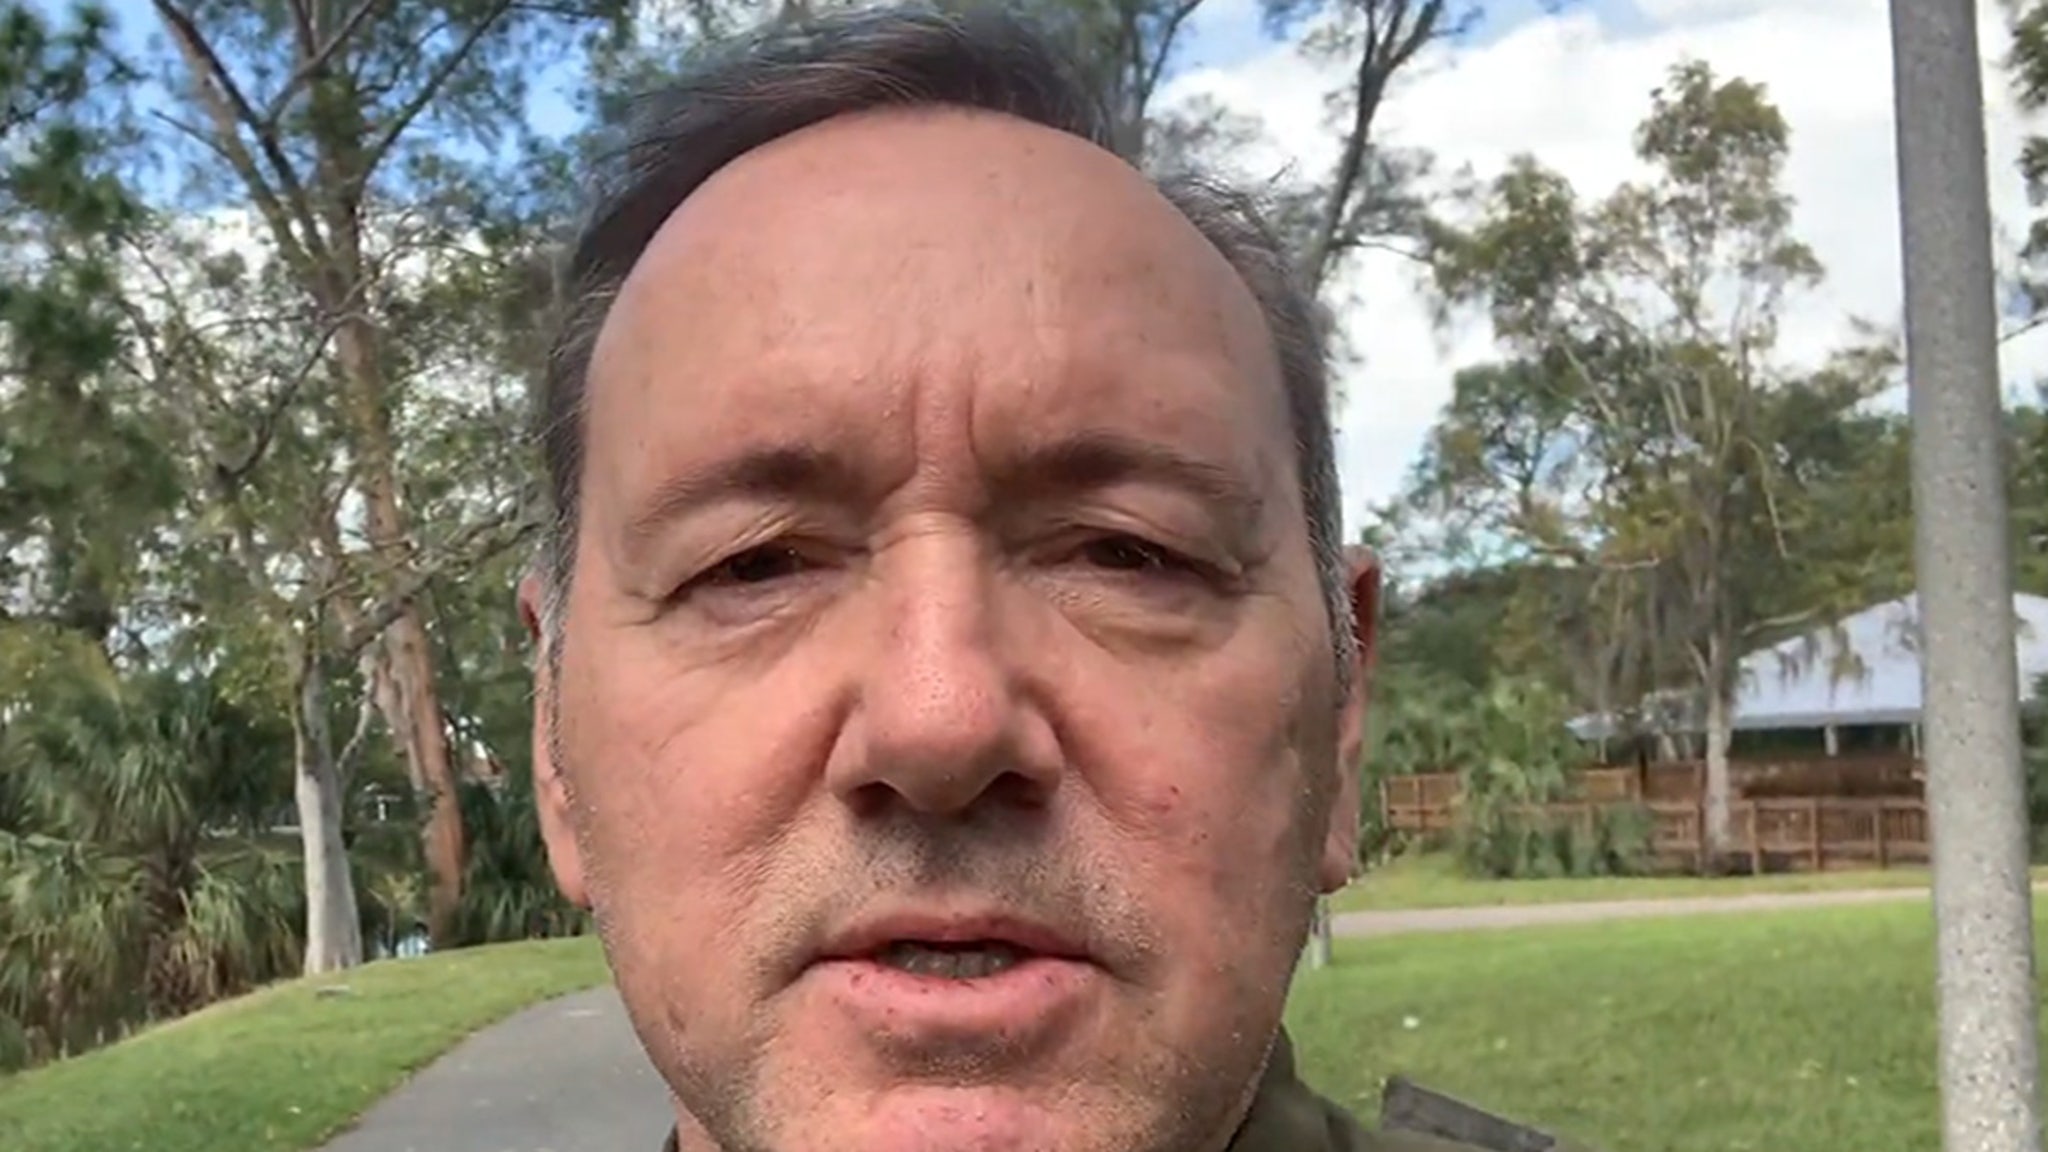 Kevin Spacey says in a message on Christmas Eve that friends were contemplating suicide